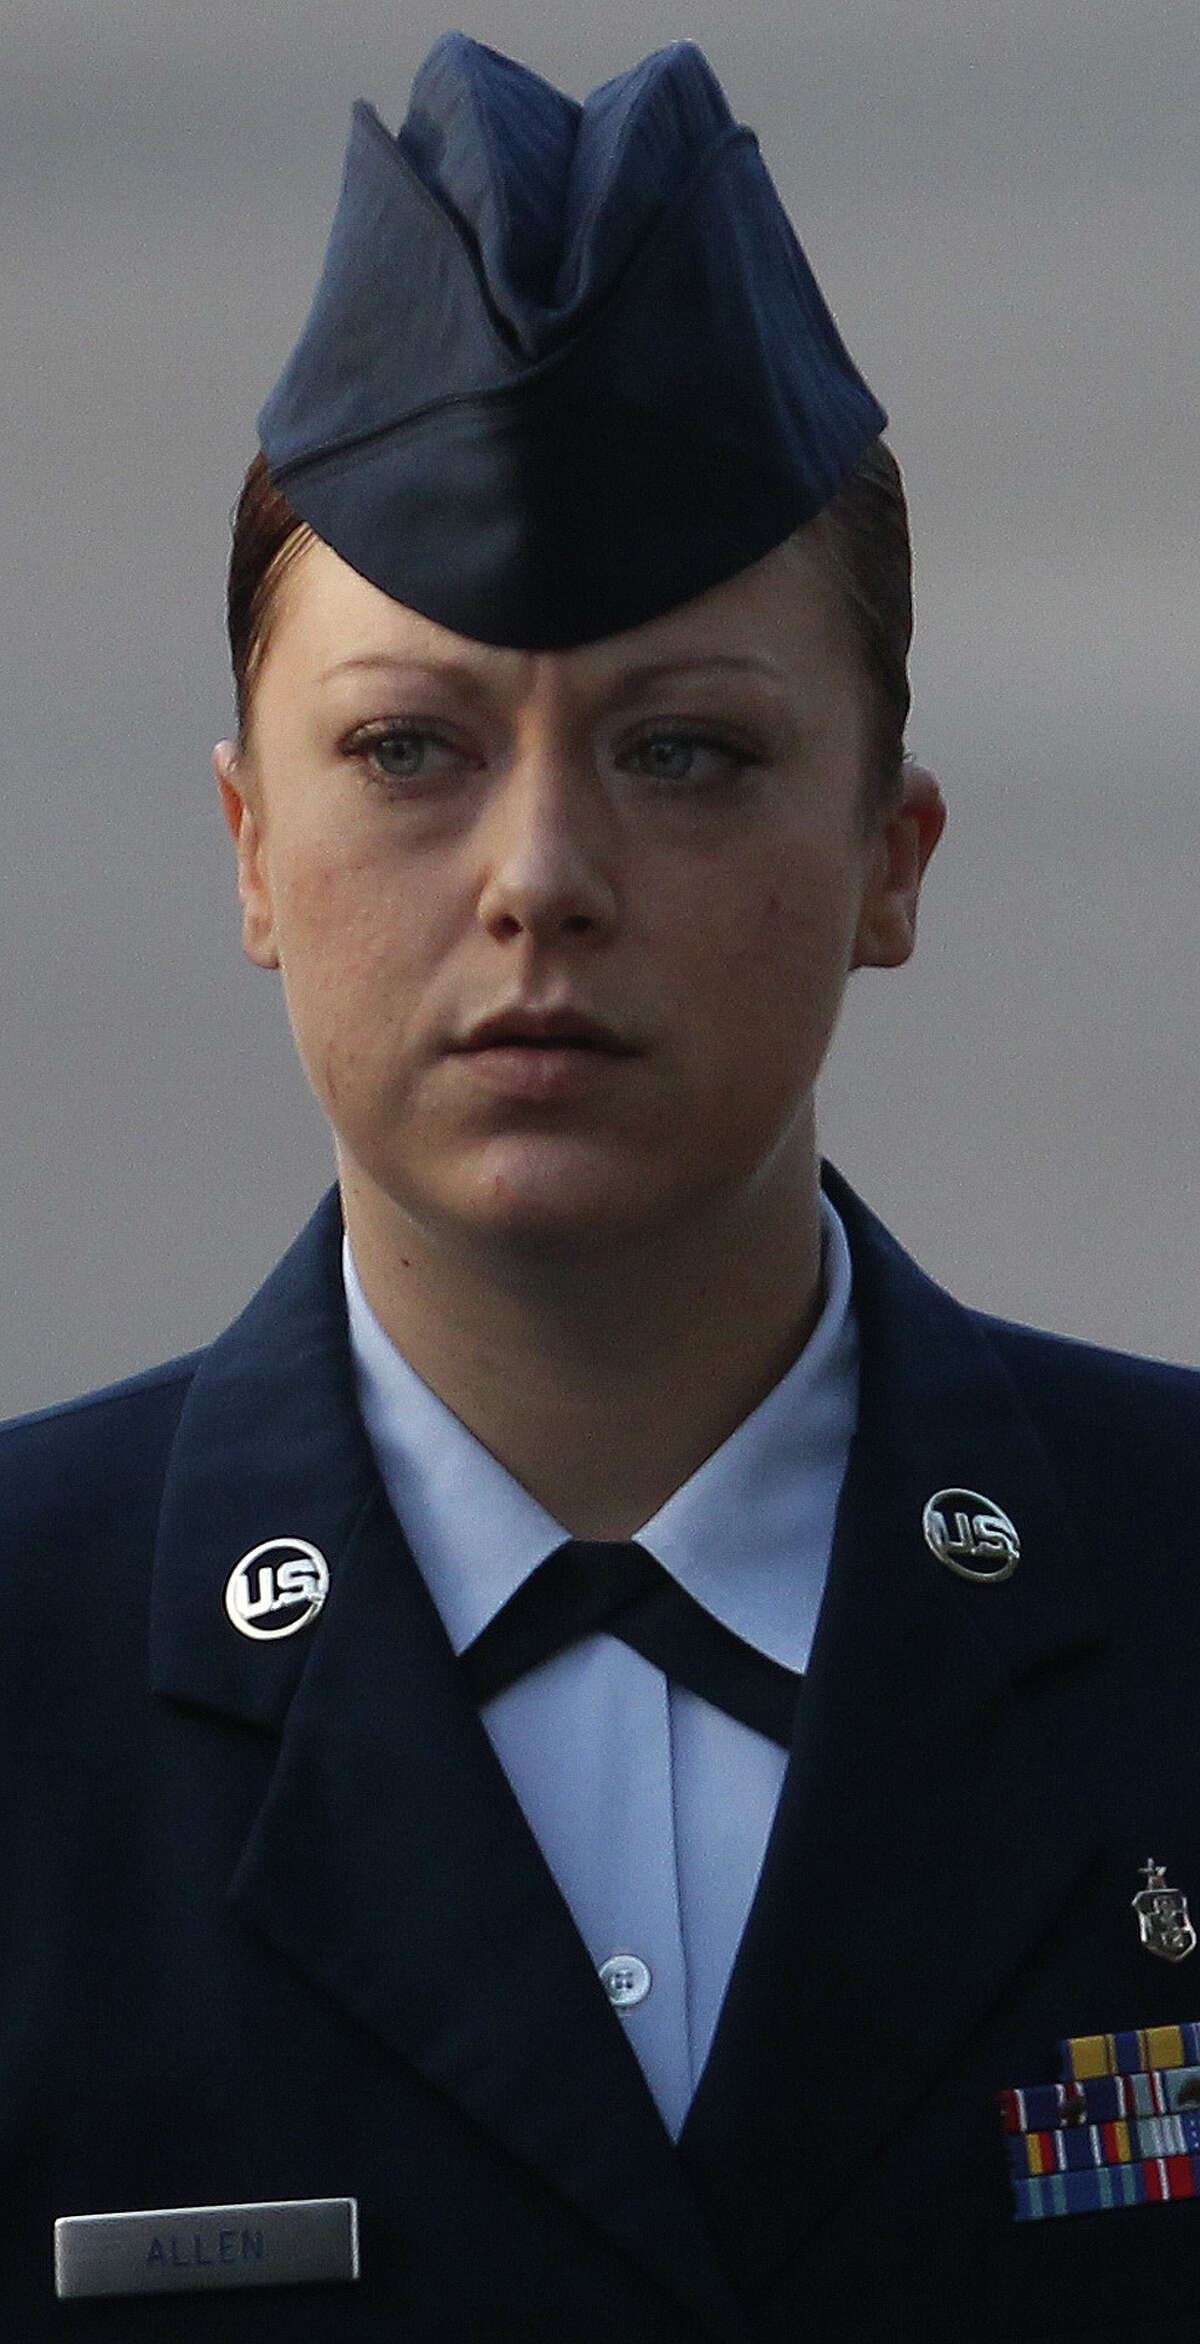 U.S. Air Force Staff Sergeant Emily Allen walks to a hearing Wednesday May 1, 2013 at Joint Base San Antonio-Lackland. Allen is the first woman basic training instructor charged in the scandal at Joint Base San Antonio-Lackland and is charged with having sex with a trainee.